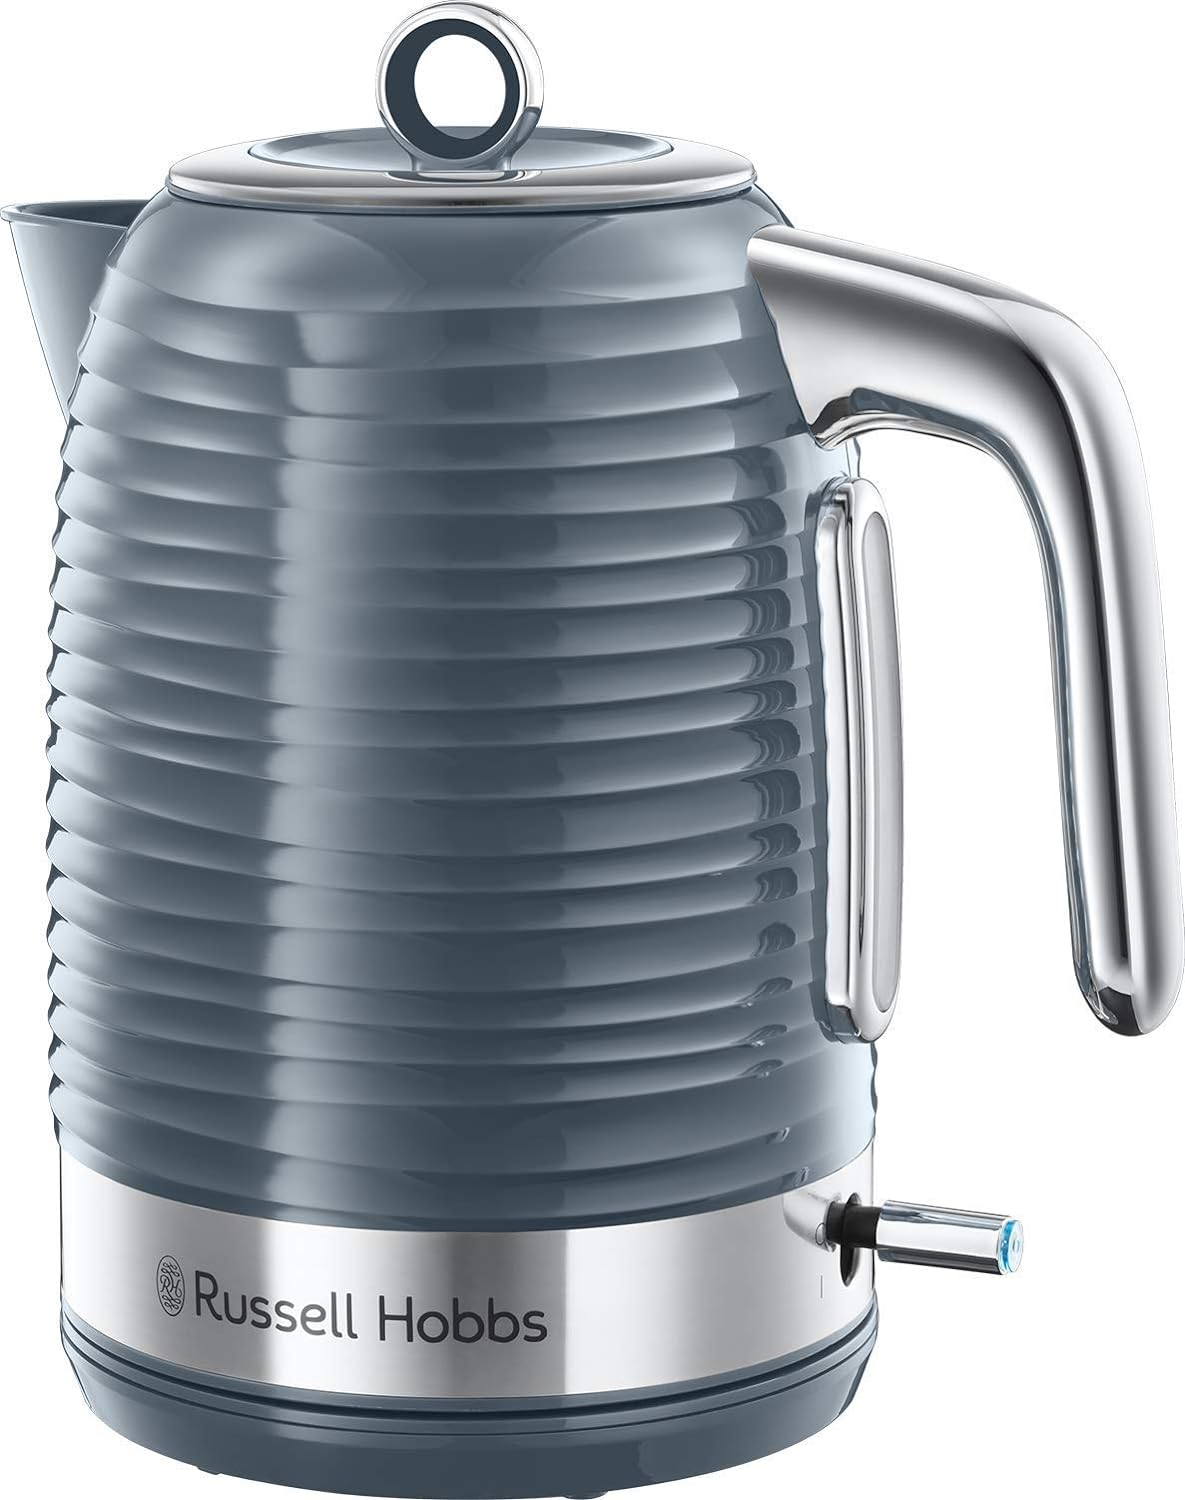 Russell Hobbs Inspire Electric 1.7L Cordless Kettle (Fast Boil 3KW, Black premium textured plastic, high gloss finish, Removable washable anti - scale filter, Pull off lid, Perfect pour spout) 24361 - Amazing Gadgets Outlet